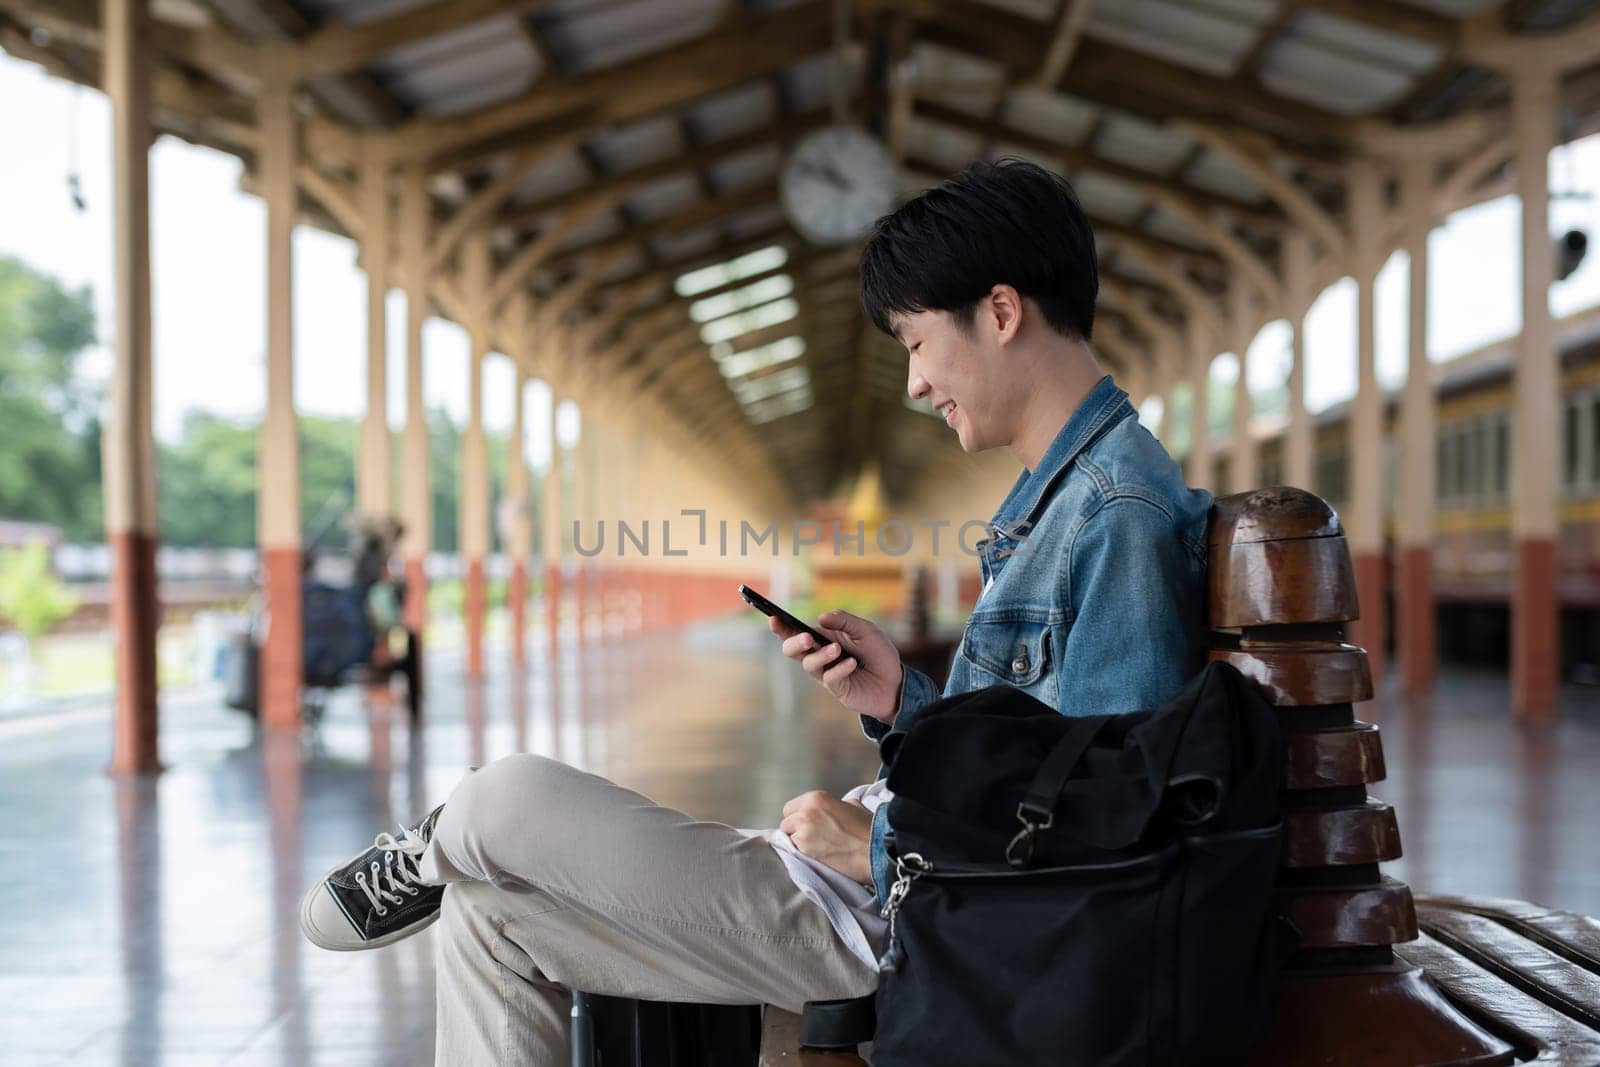 Young man with backpack checking social media on phone waiting for train at train station to travel.